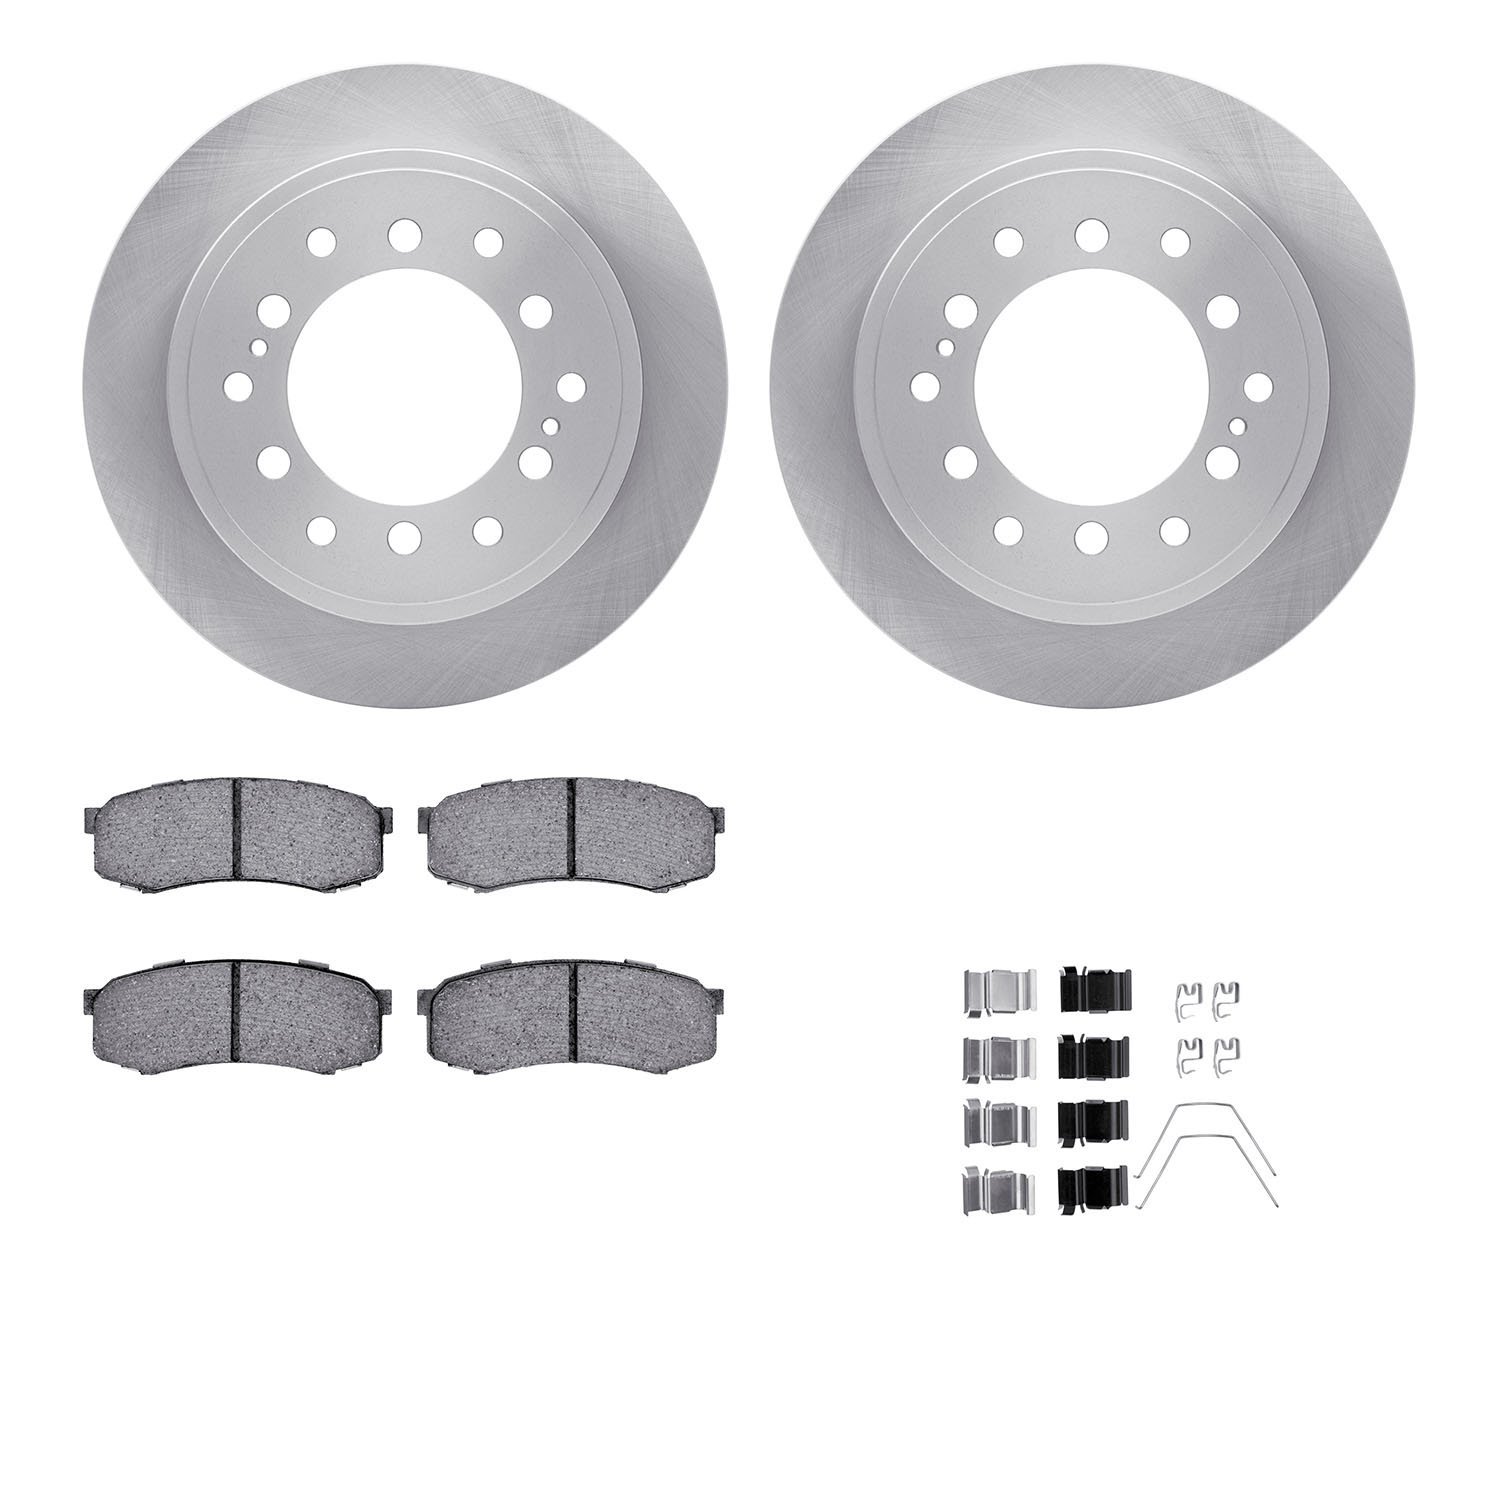 6412-76067 Brake Rotors with Ultimate-Duty Brake Pads Kit & Hardware, Fits Select Lexus/Toyota/Scion, Position: Rear